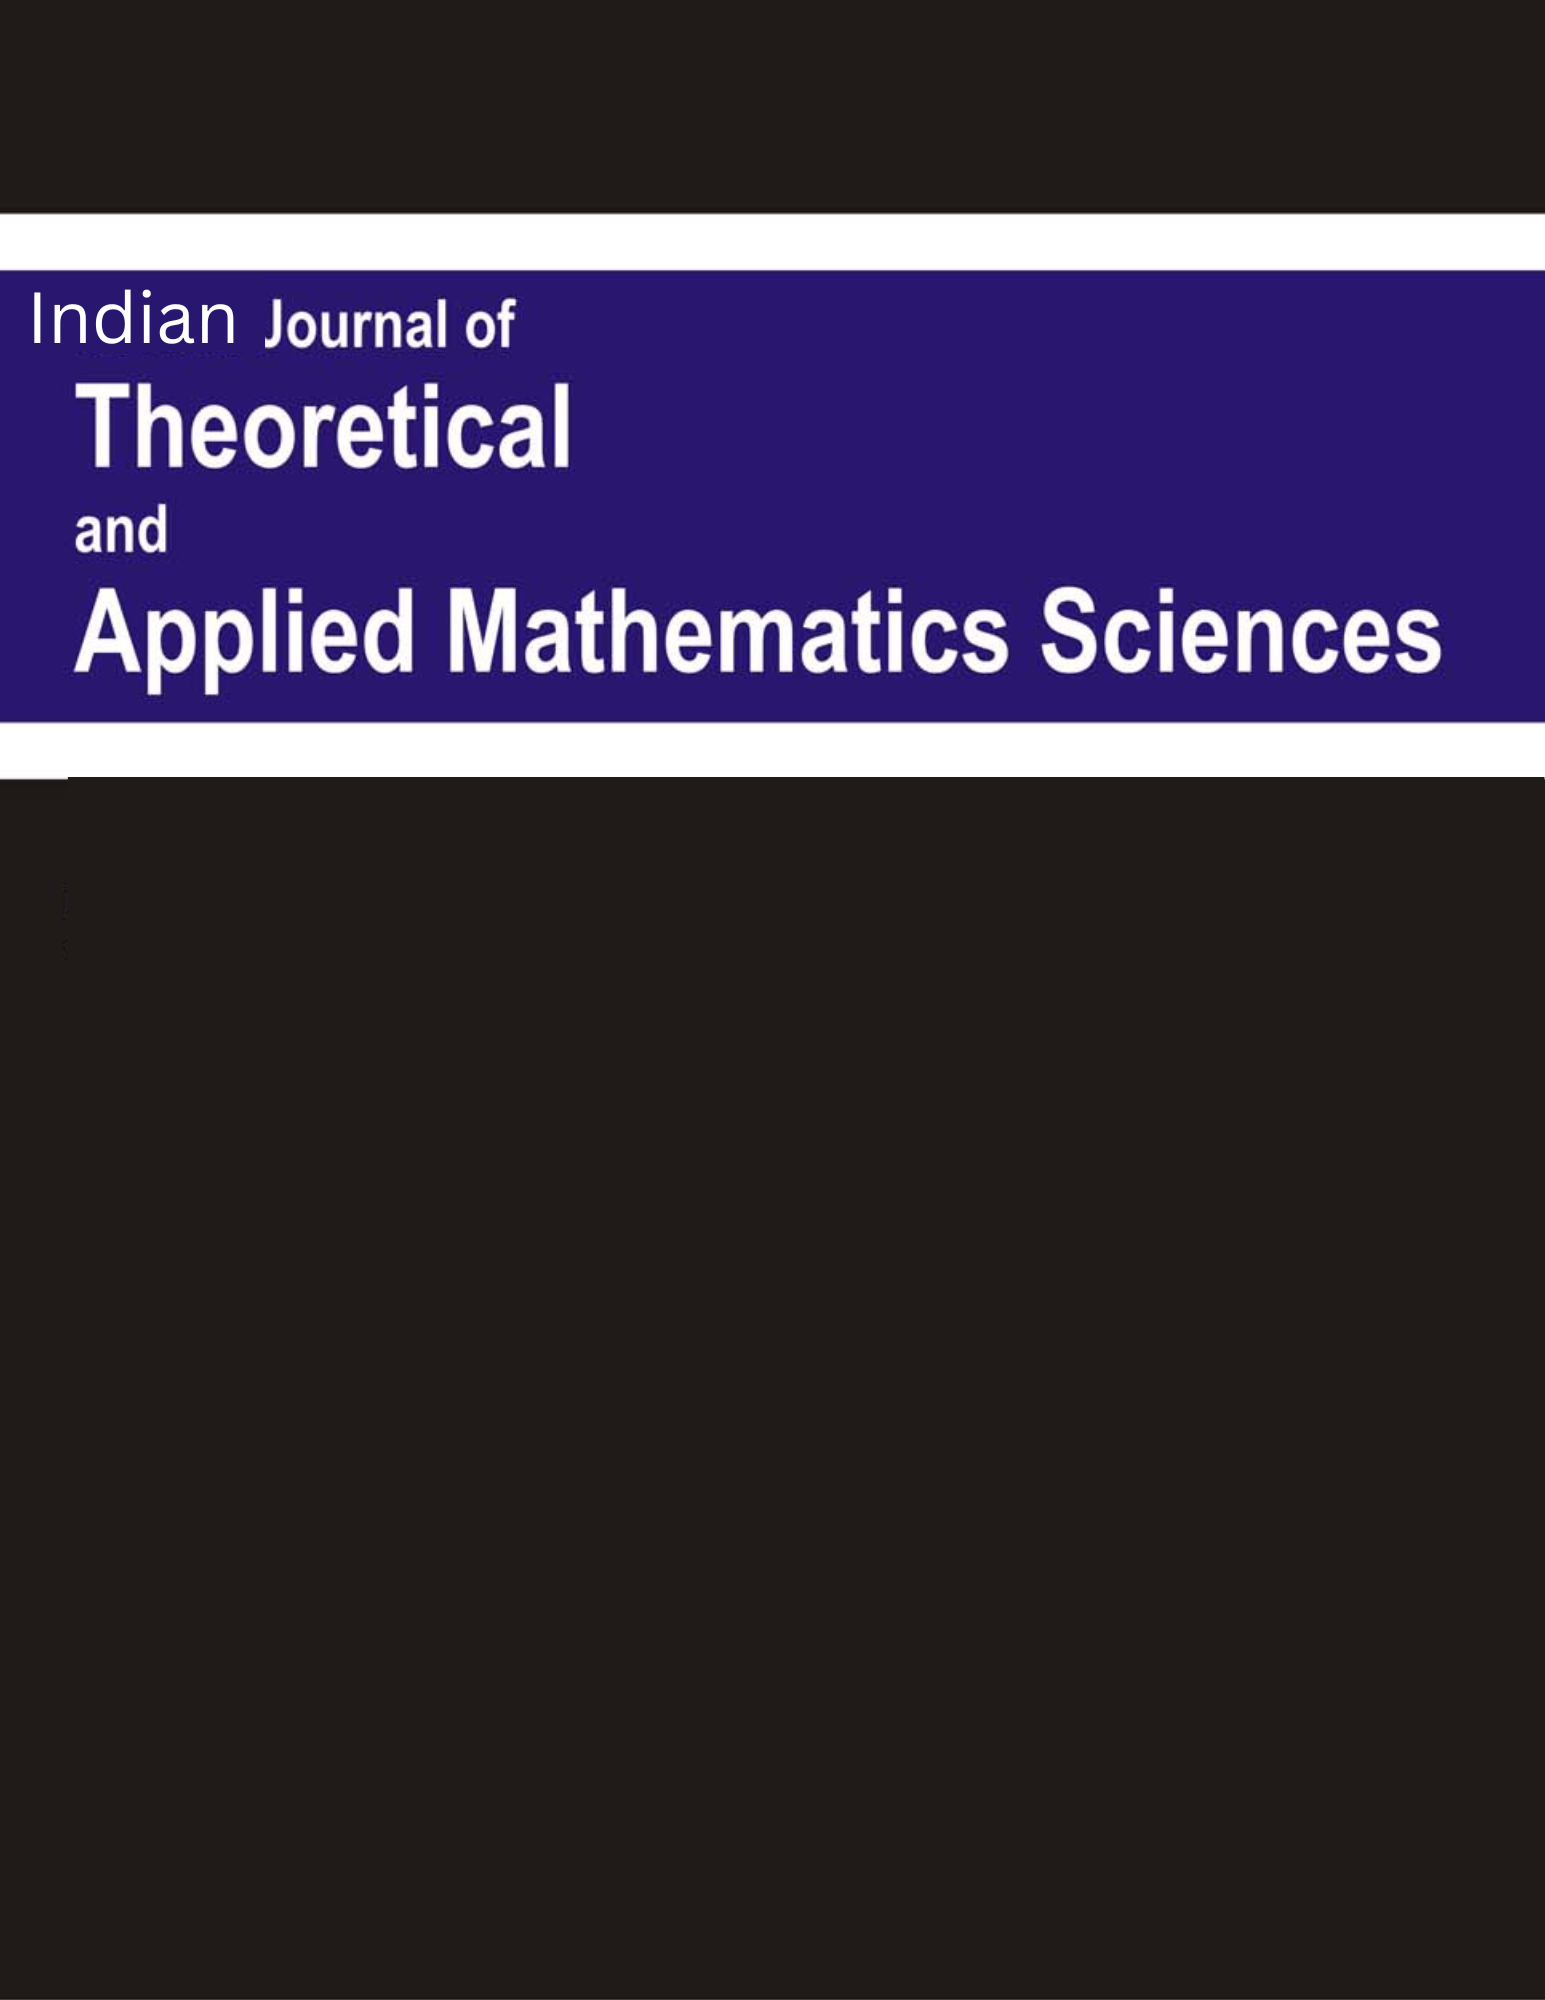 Indian Journal of Theoretical and Applied Mathematical Sciences